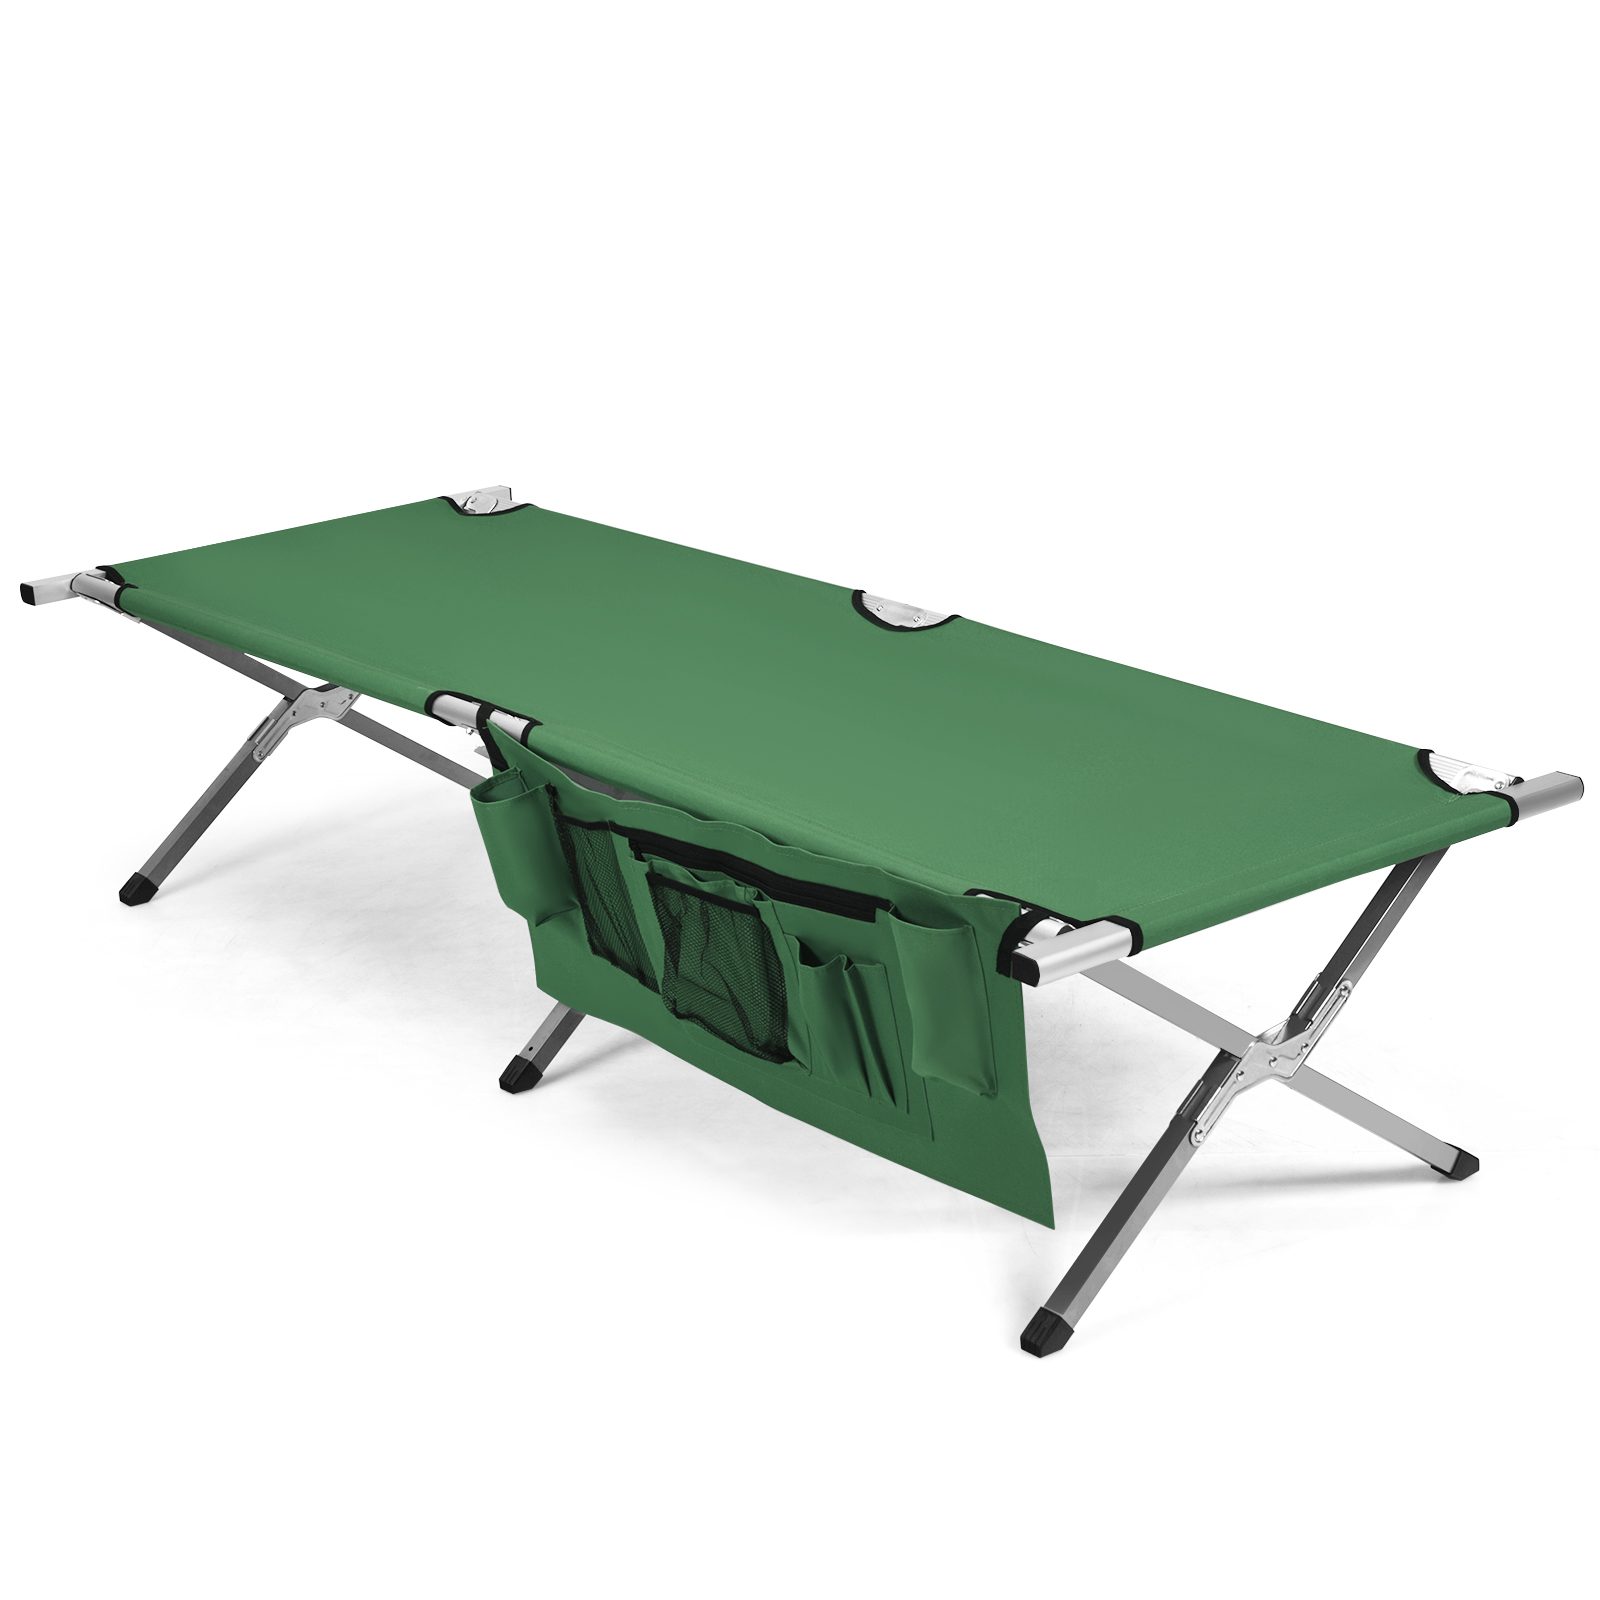 Folding_Camping_Bed_Outdoor_Sleeping_Cot_with_Carry_Bag_for_Beach_Green-8.jpg